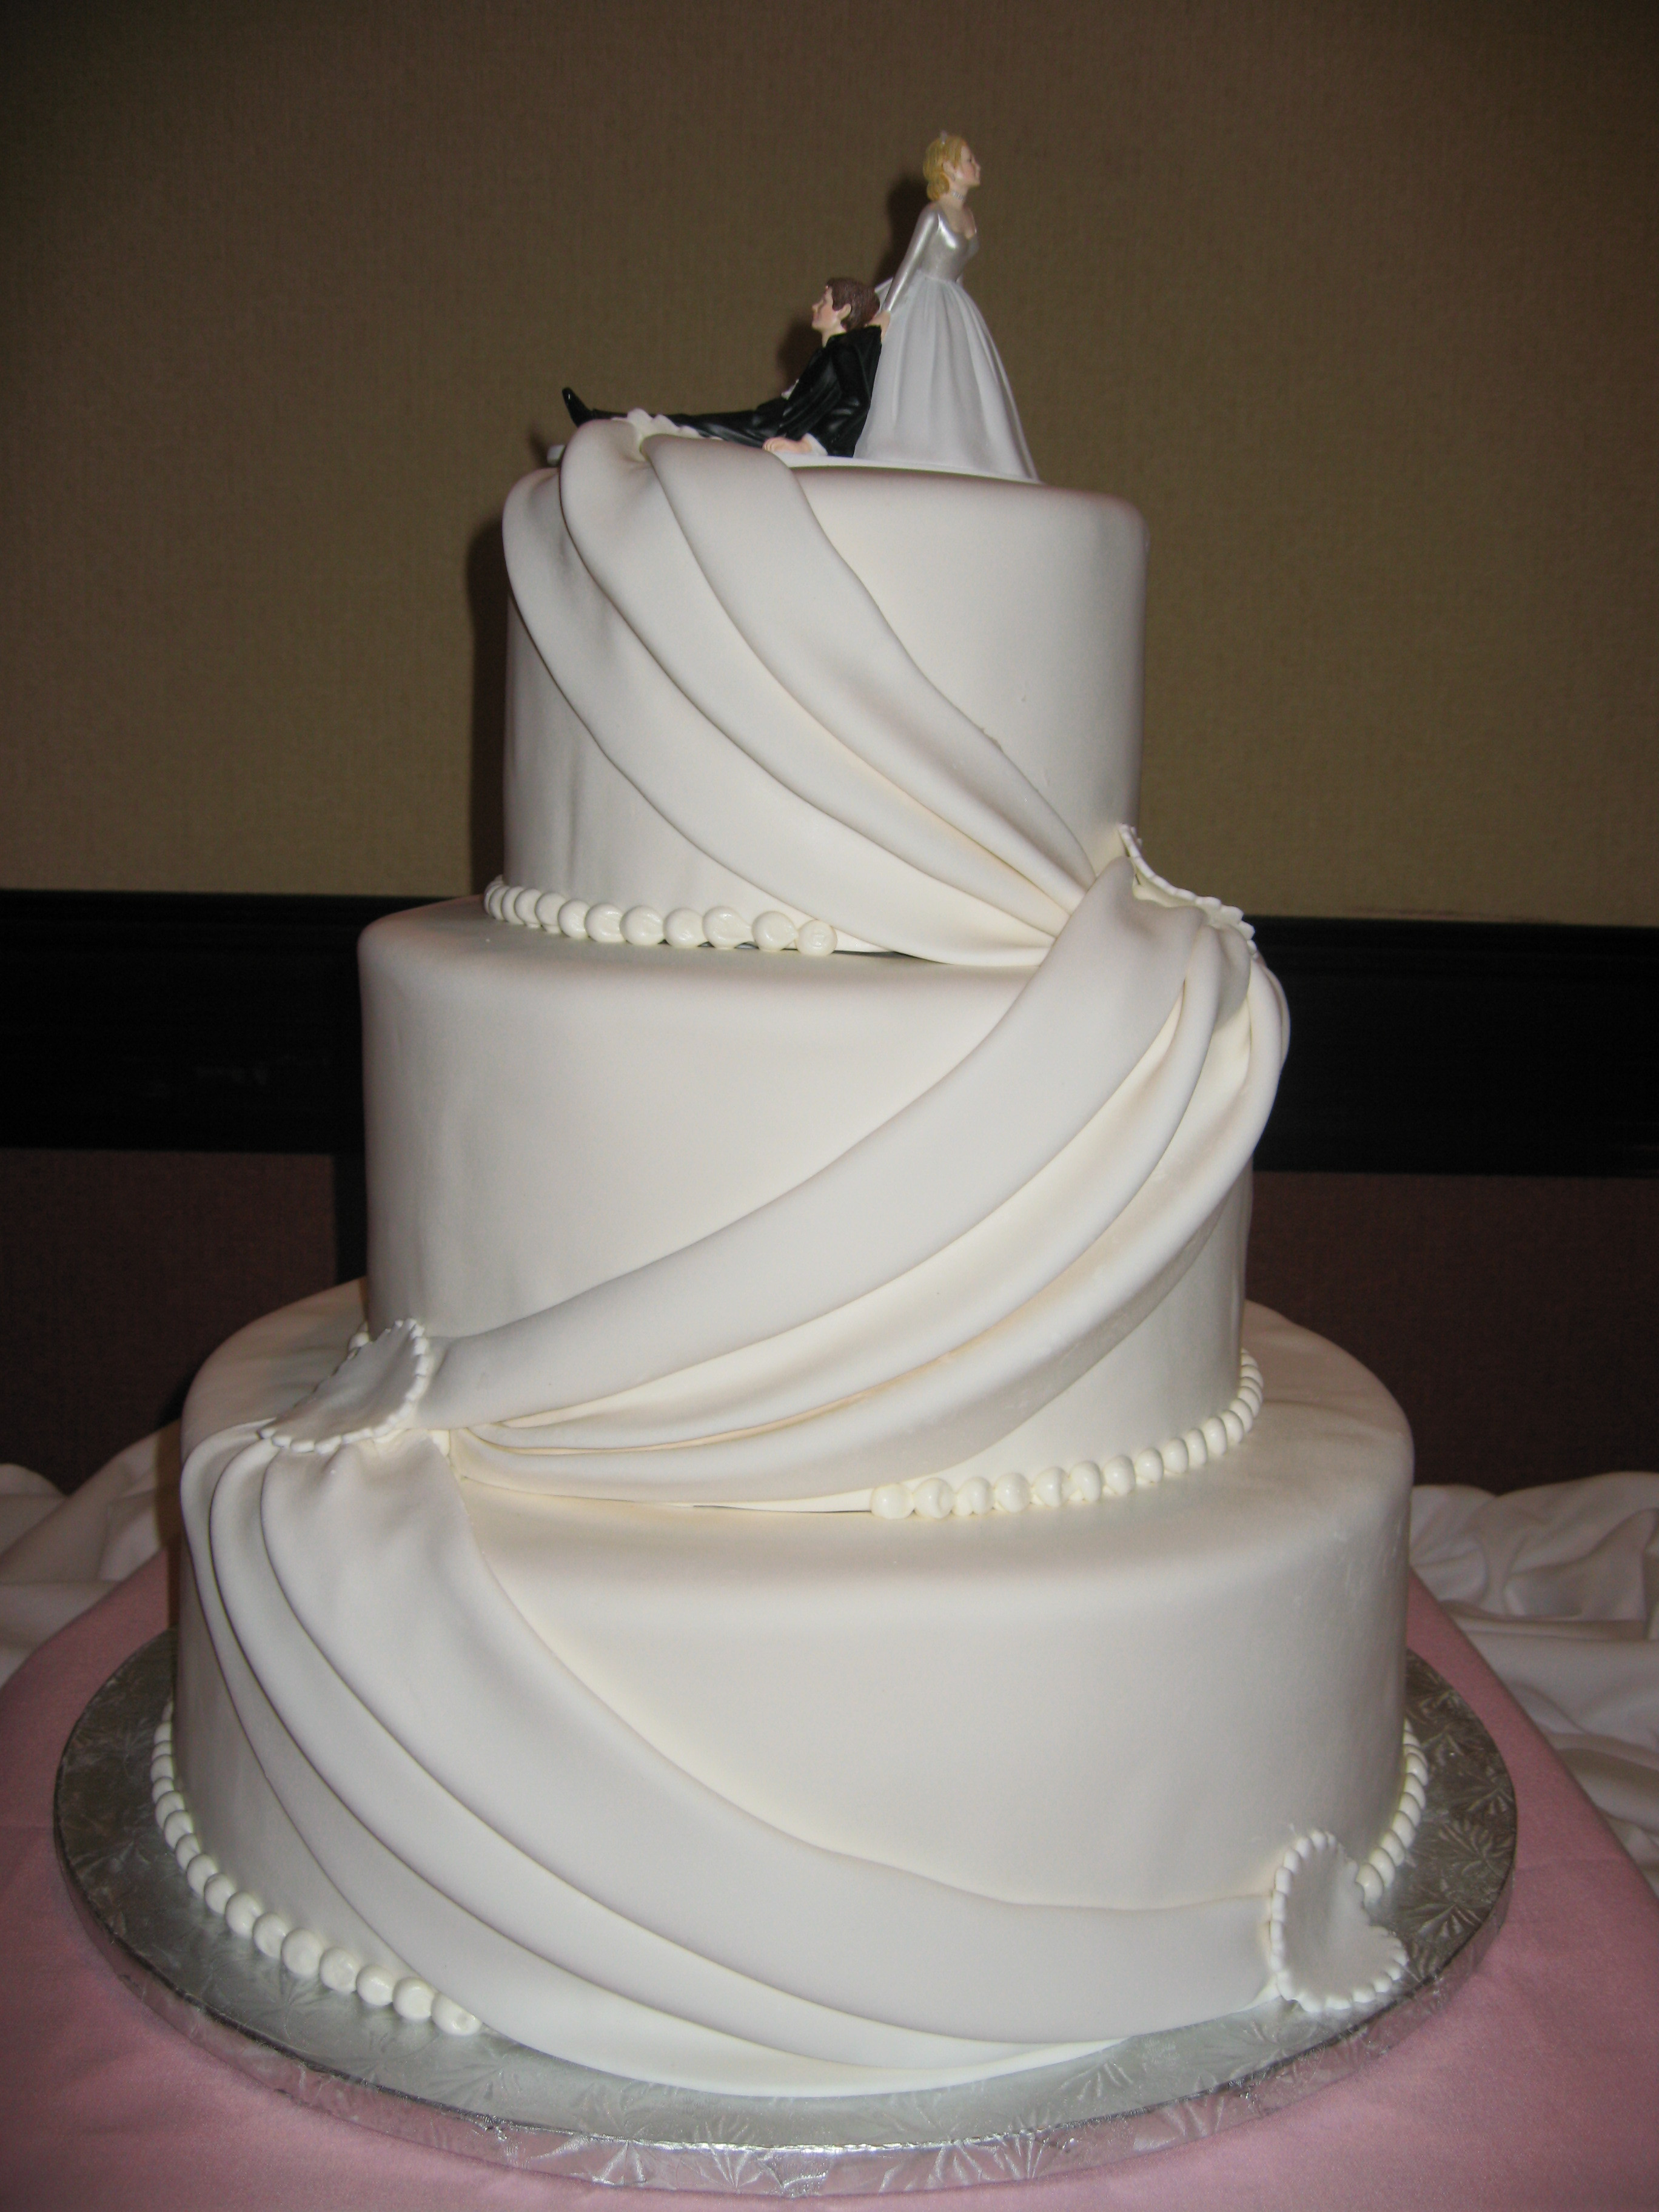 Wedding Cakes Suppliers
 Wedding Cake Decorations Wedding Planner and Decorations